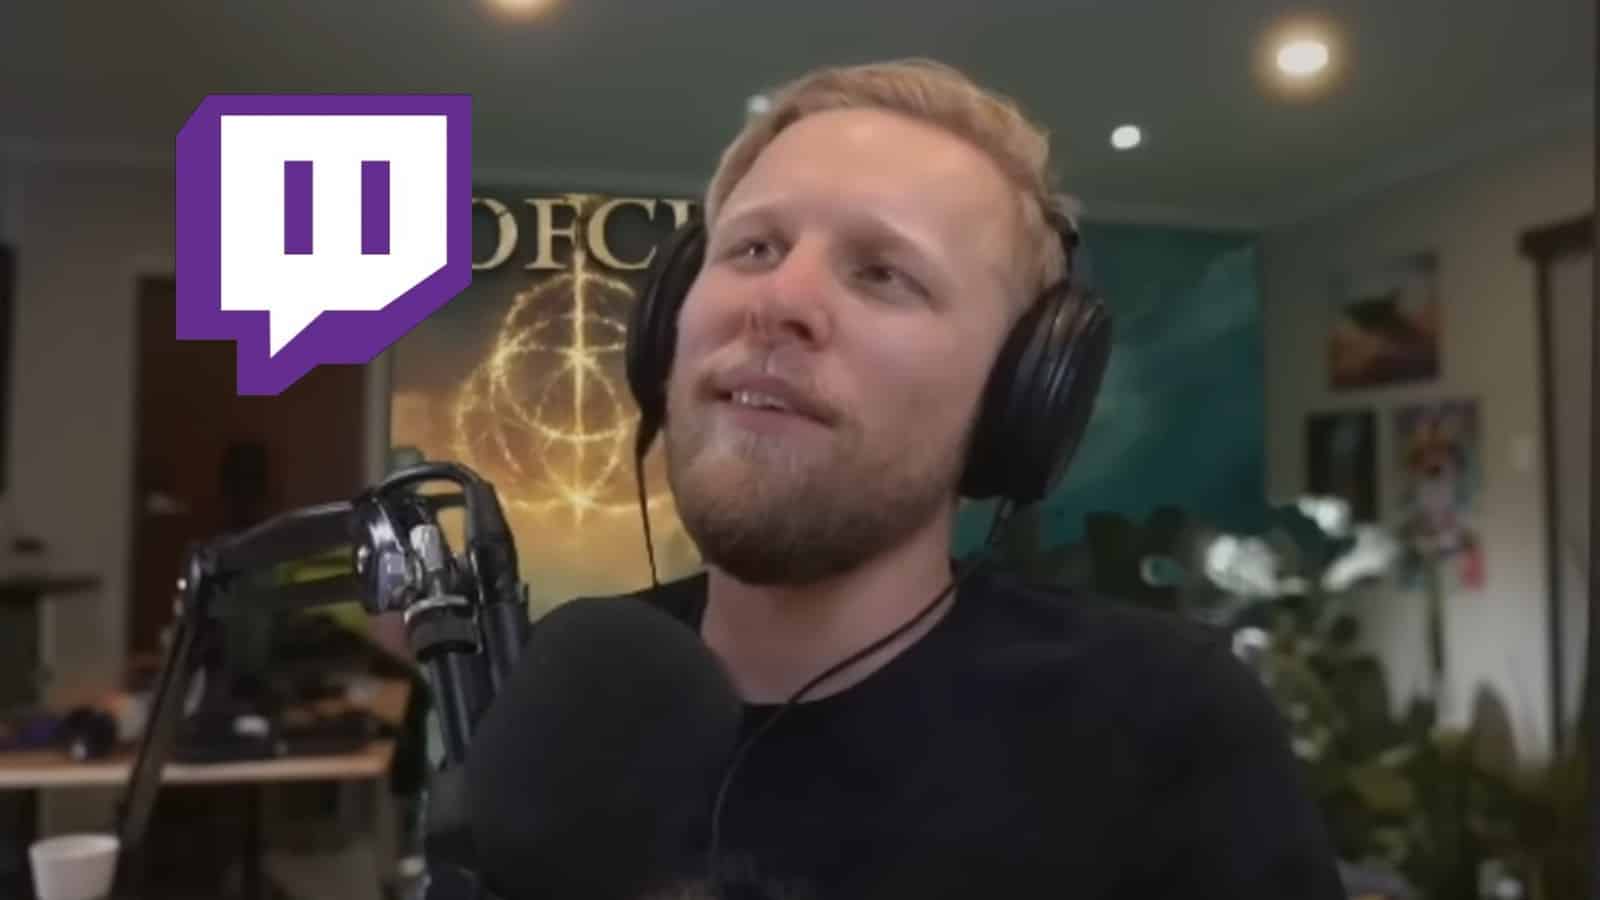 Quin69 Twitch ban